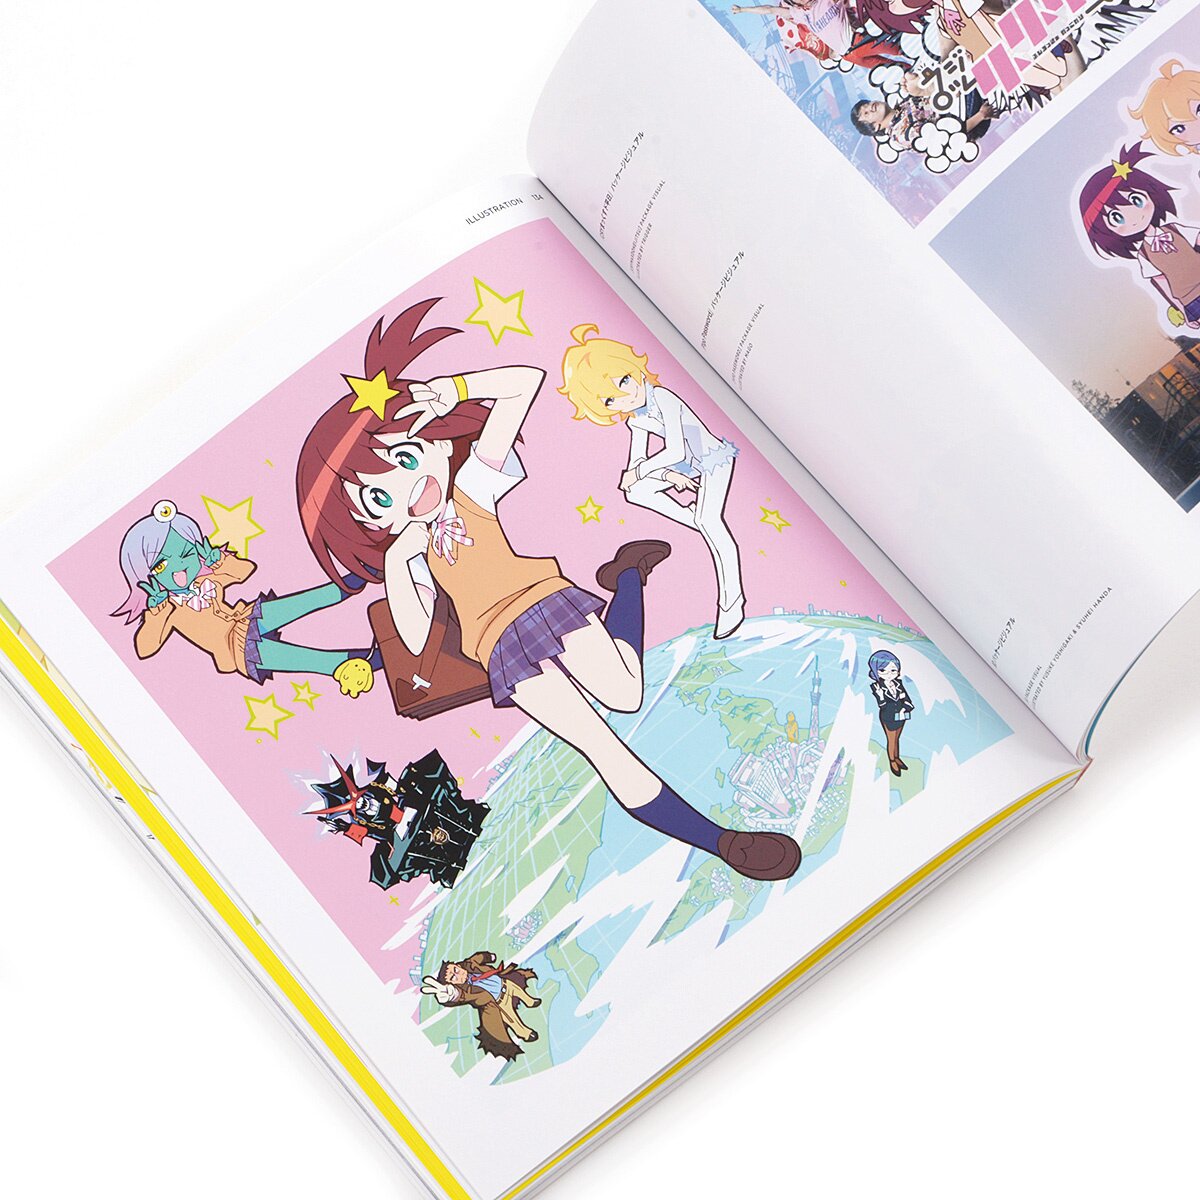 The Art of Trigger Animation Studio 9: Space Patrol Luluco